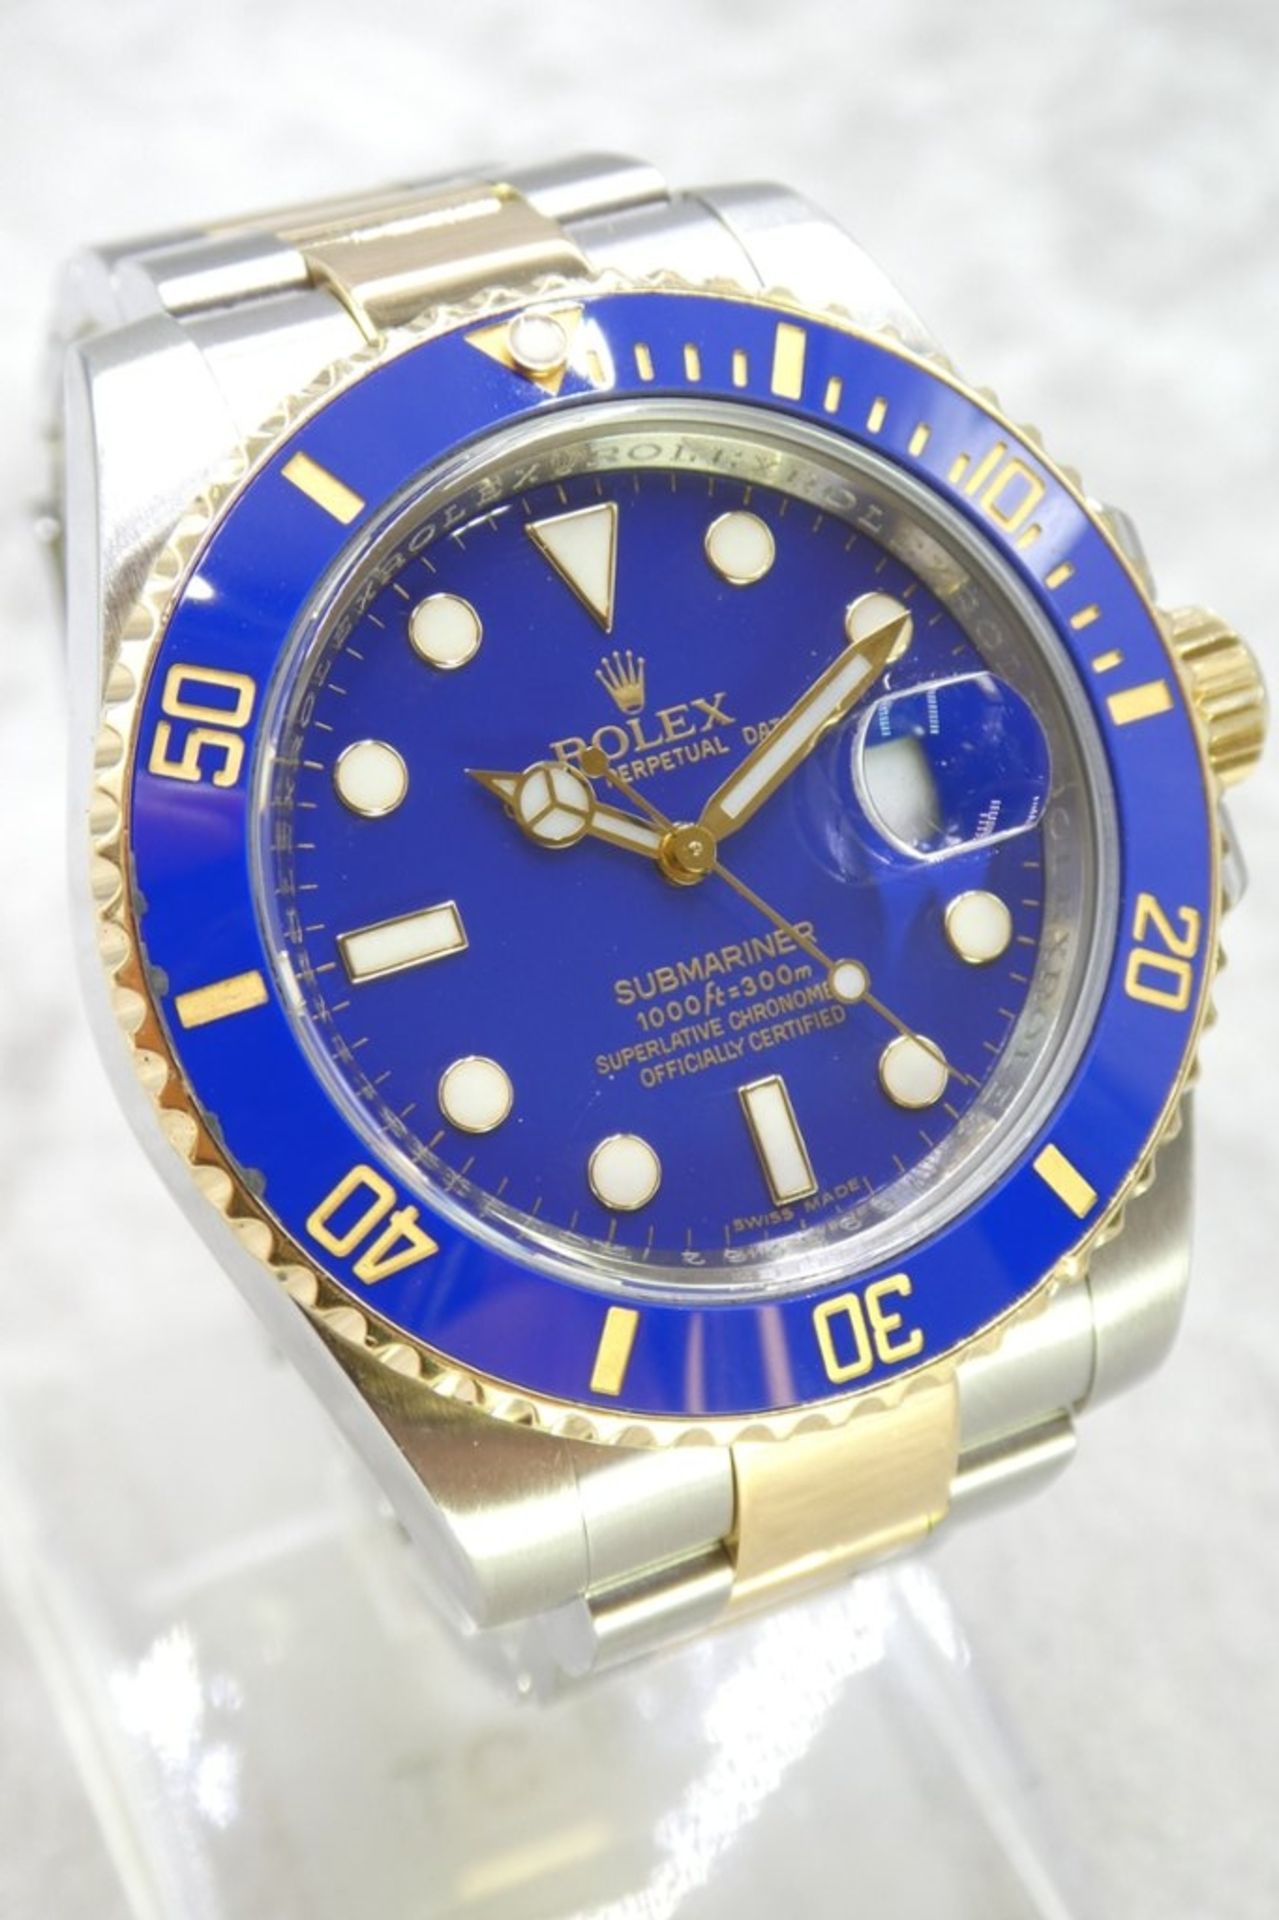 A Bi-Metal Rolex Submariner Watch, Stainless steel and 18ct yellow gold with a blue bezel and a blue